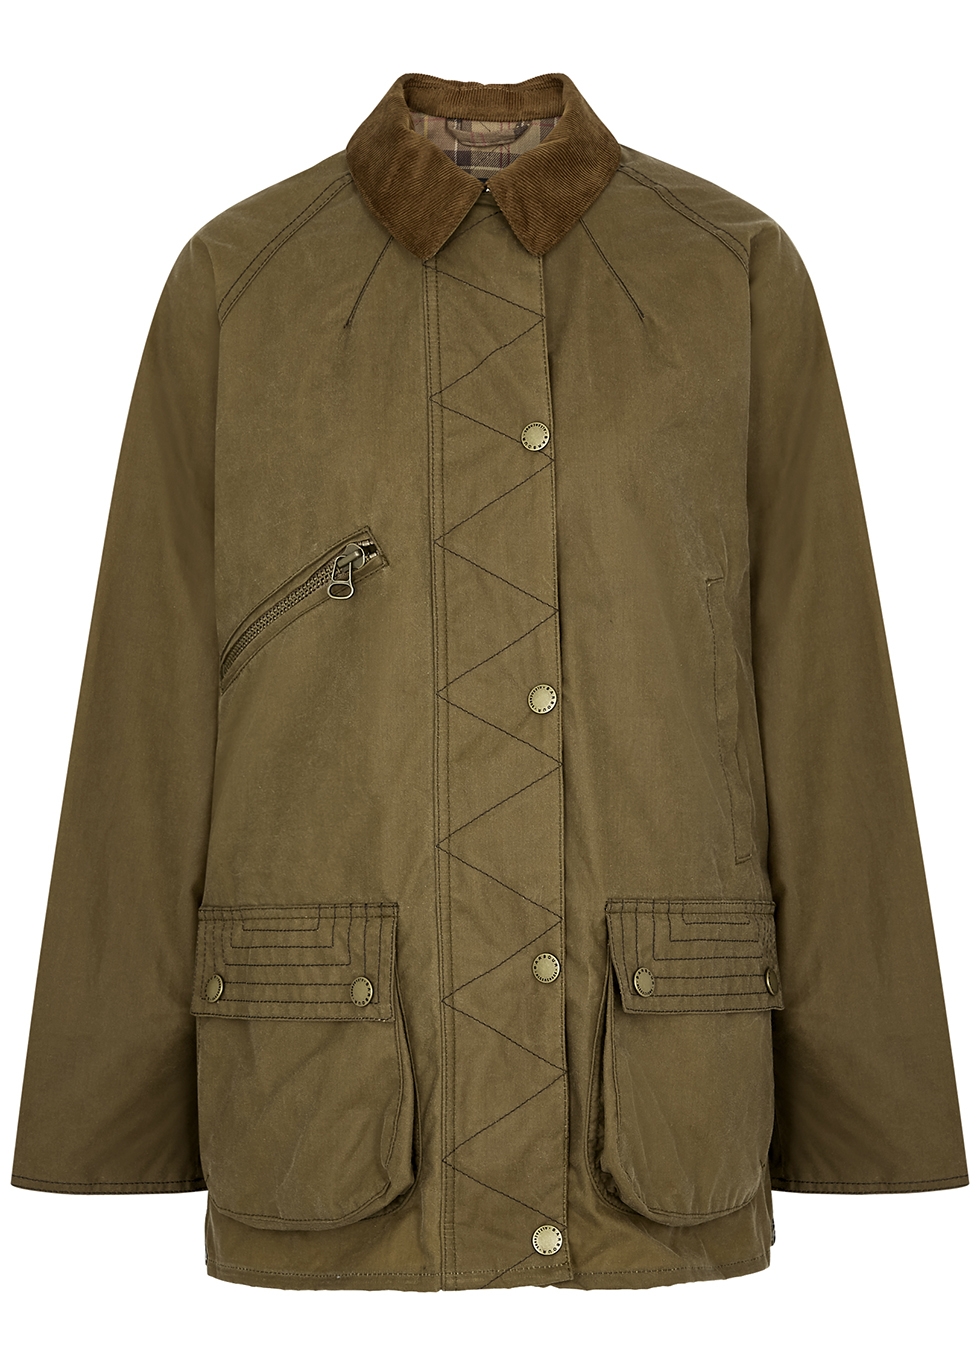 Barbour by ALEXACHUNG Carmen brown waxed cotton jacket